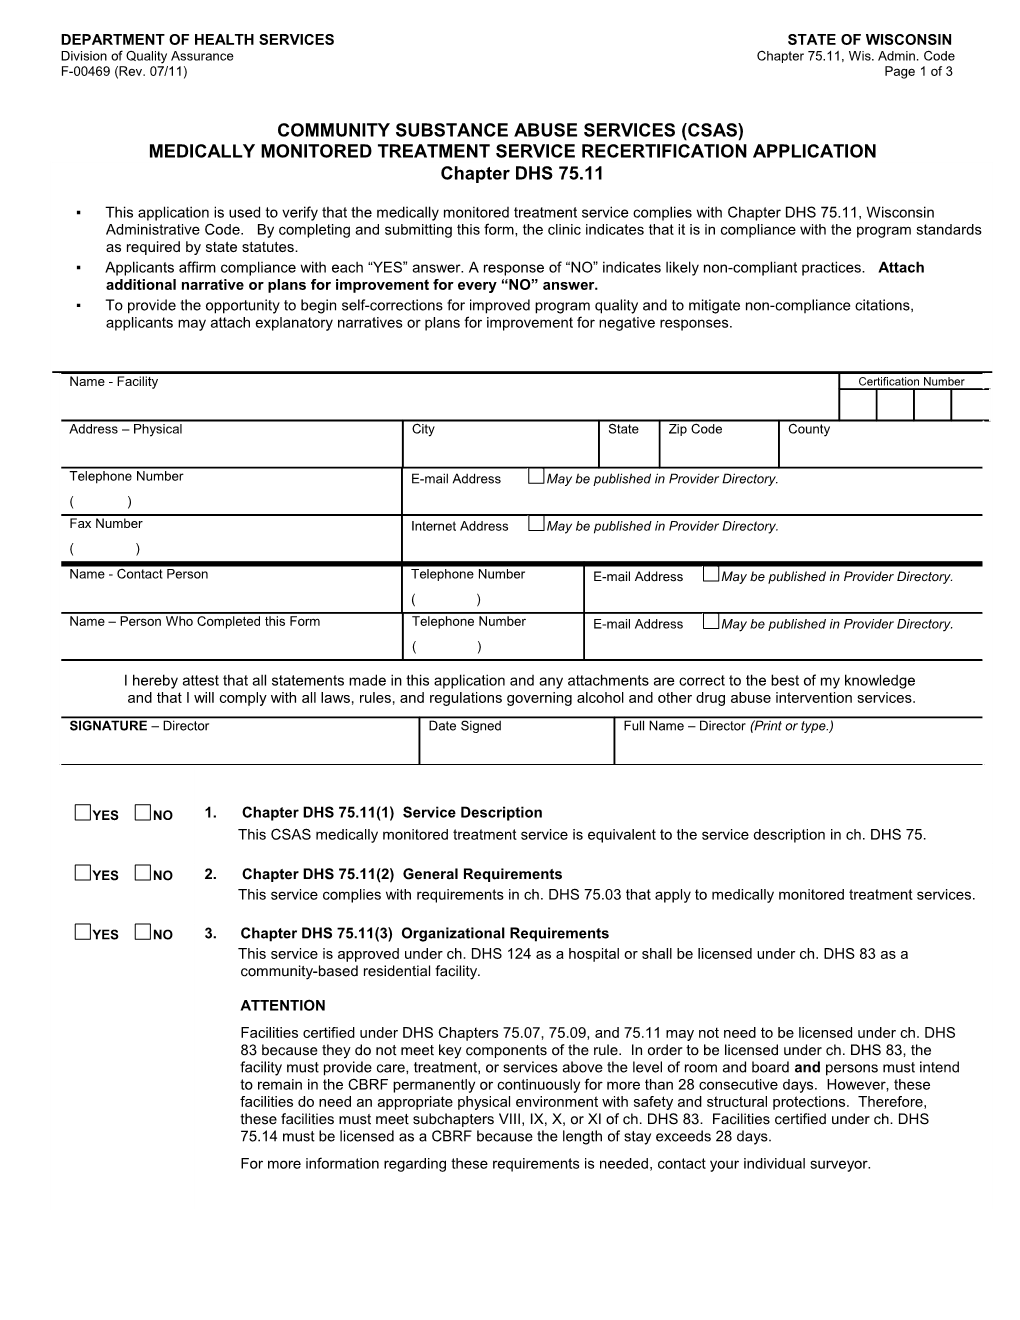 CSAS Medically Monitored Treatment Service Recertification Application - DHS 75.11, F-00469